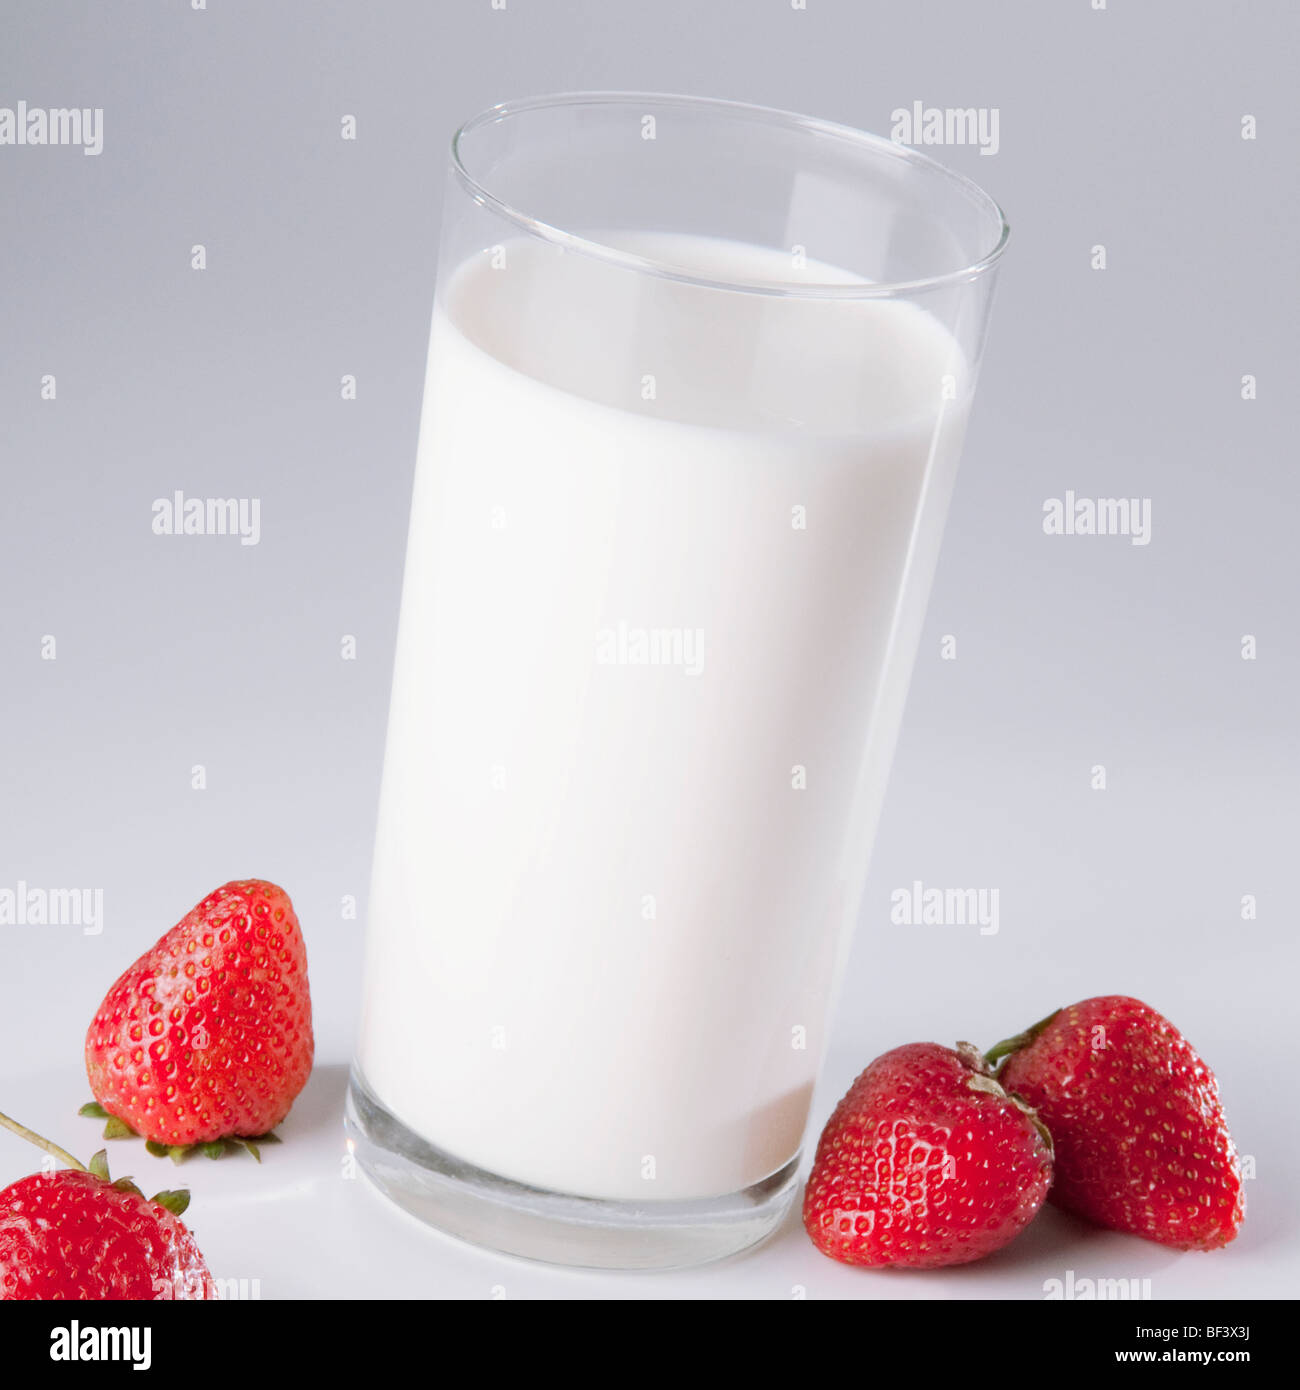 Close-up of a glass of milk and strawberries Stock Photo